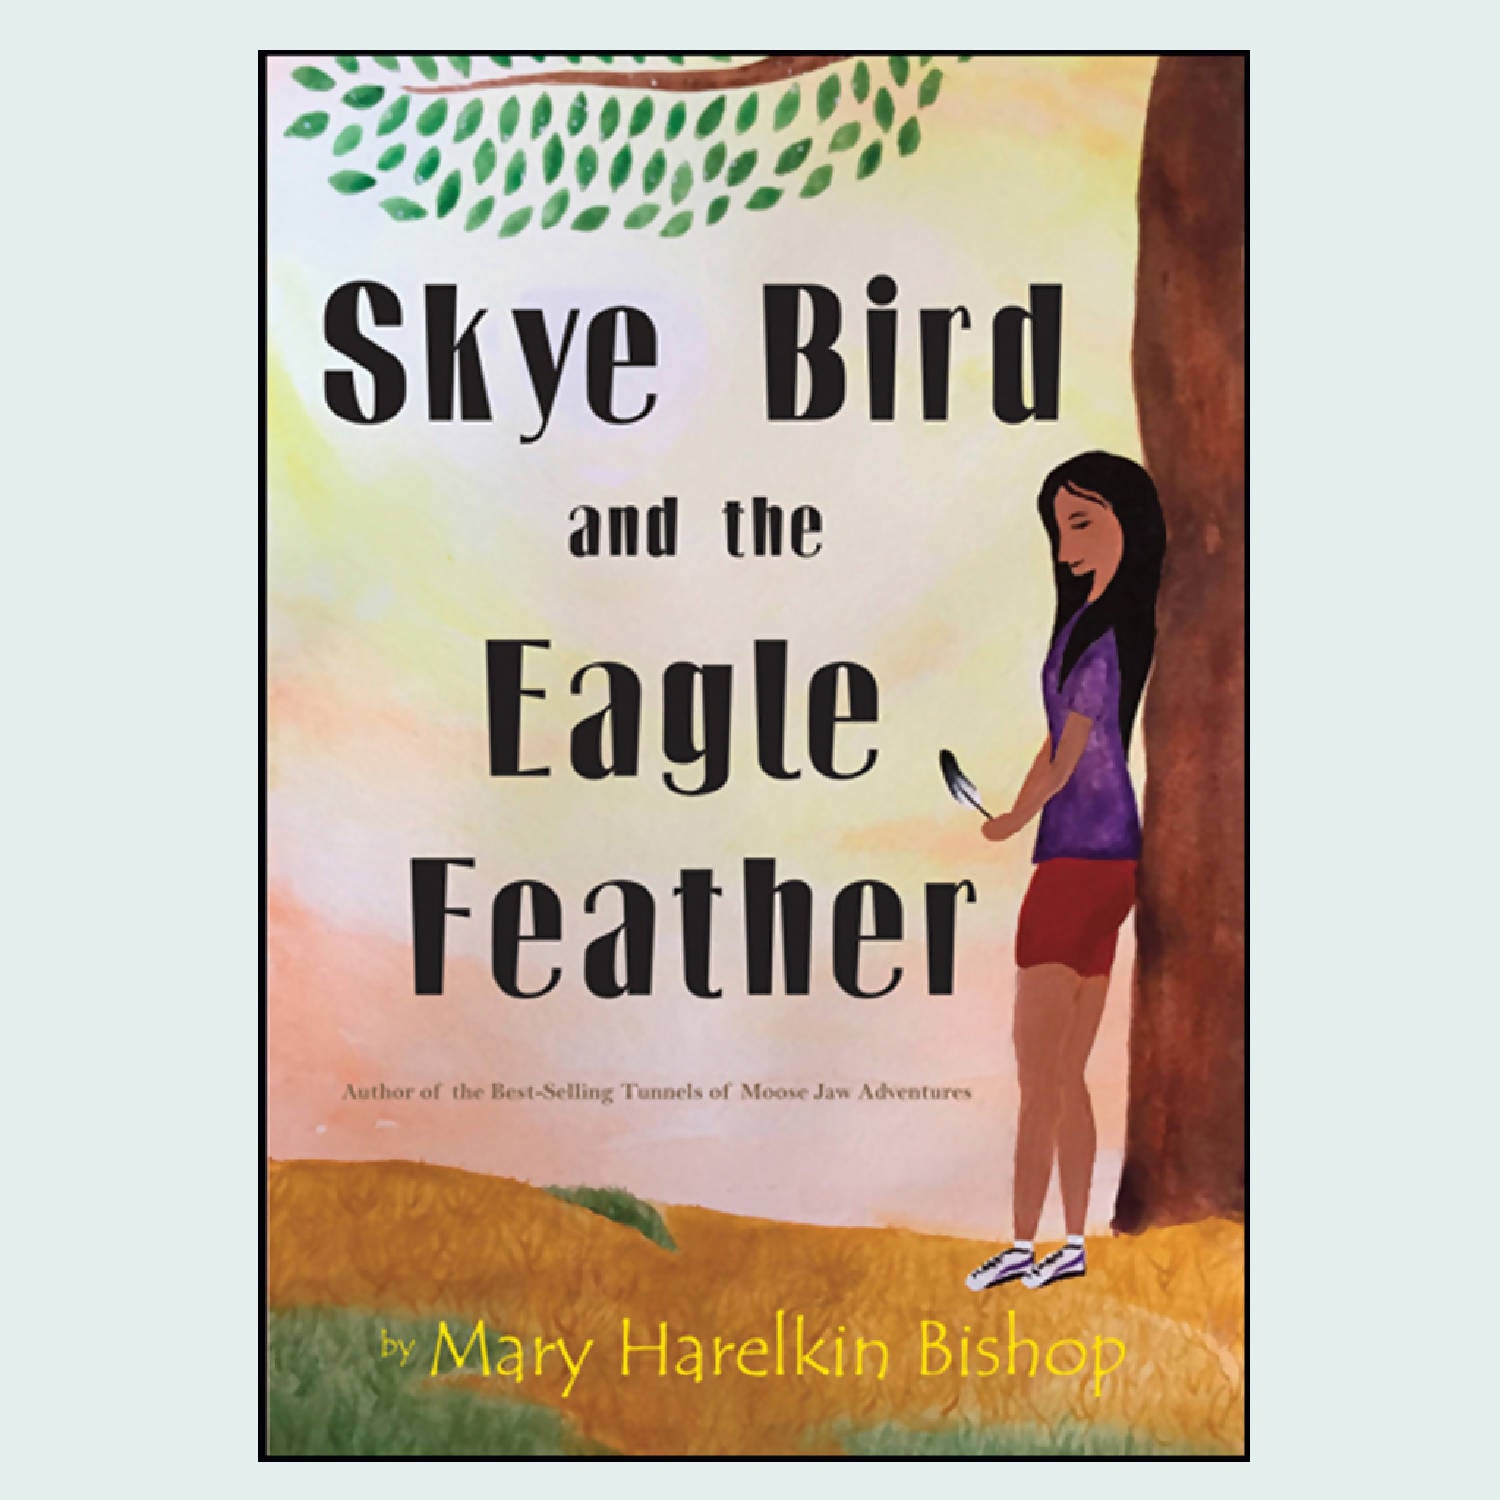 Skye Bird and the Eagle Feather book by Mary Harelkin Bishop